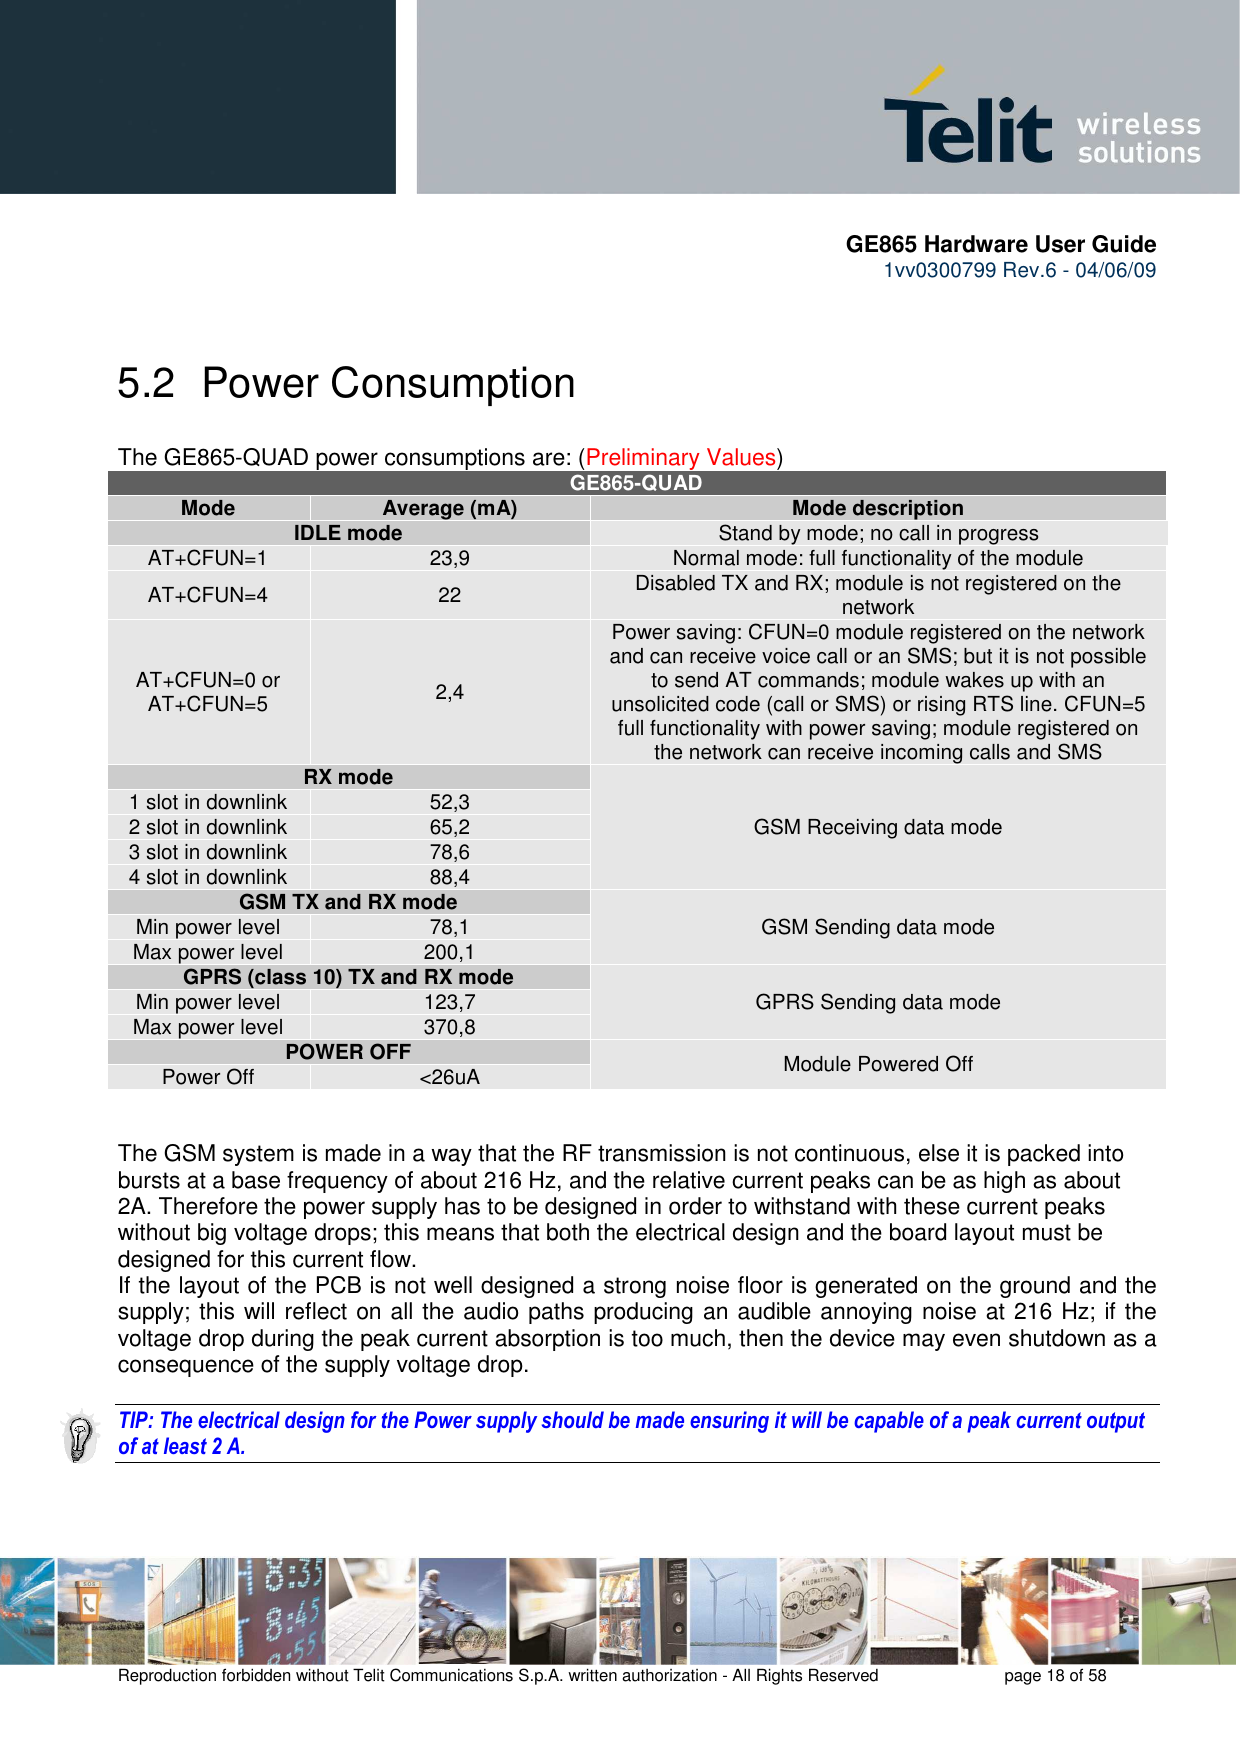       GE865 Hardware User Guide 1vv0300799 Rev.6 - 04/06/09      Reproduction forbidden without Telit Communications S.p.A. written authorization - All Rights Reserved    page 18 of 58   5.2  Power Consumption The GE865-QUAD power consumptions are: (Preliminary Values) GE865-QUAD Mode  Average (mA) Mode description IDLE mode Stand by mode; no call in progress AT+CFUN=1  23,9  Normal mode: full functionality of the module AT+CFUN=4  22  Disabled TX and RX; module is not registered on the network AT+CFUN=0 or AT+CFUN=5  2,4 Power saving: CFUN=0 module registered on the network and can receive voice call or an SMS; but it is not possible to send AT commands; module wakes up with an unsolicited code (call or SMS) or rising RTS line. CFUN=5 full functionality with power saving; module registered on the network can receive incoming calls and SMS  RX mode GSM Receiving data mode 1 slot in downlink  52,3 2 slot in downlink  65,2 3 slot in downlink  78,6 4 slot in downlink  88,4 GSM TX and RX mode  GSM Sending data mode Min power level  78,1 Max power level  200,1 GPRS (class 10) TX and RX mode  GPRS Sending data mode Min power level  123,7 Max power level  370,8 POWER OFF  Module Powered Off Power Off  &lt;26uA   The GSM system is made in a way that the RF transmission is not continuous, else it is packed into bursts at a base frequency of about 216 Hz, and the relative current peaks can be as high as about 2A. Therefore the power supply has to be designed in order to withstand with these current peaks without big voltage drops; this means that both the electrical design and the board layout must be designed for this current flow. If the layout of the PCB is not well designed a strong noise floor is generated on the ground and the supply; this will reflect on all the audio paths producing an audible annoying noise at 216 Hz; if the voltage drop during the peak current absorption is too much, then the device may even shutdown as a consequence of the supply voltage drop.  TIP: The electrical design for the Power supply should be made ensuring it will be capable of a peak current output of at least 2 A. 